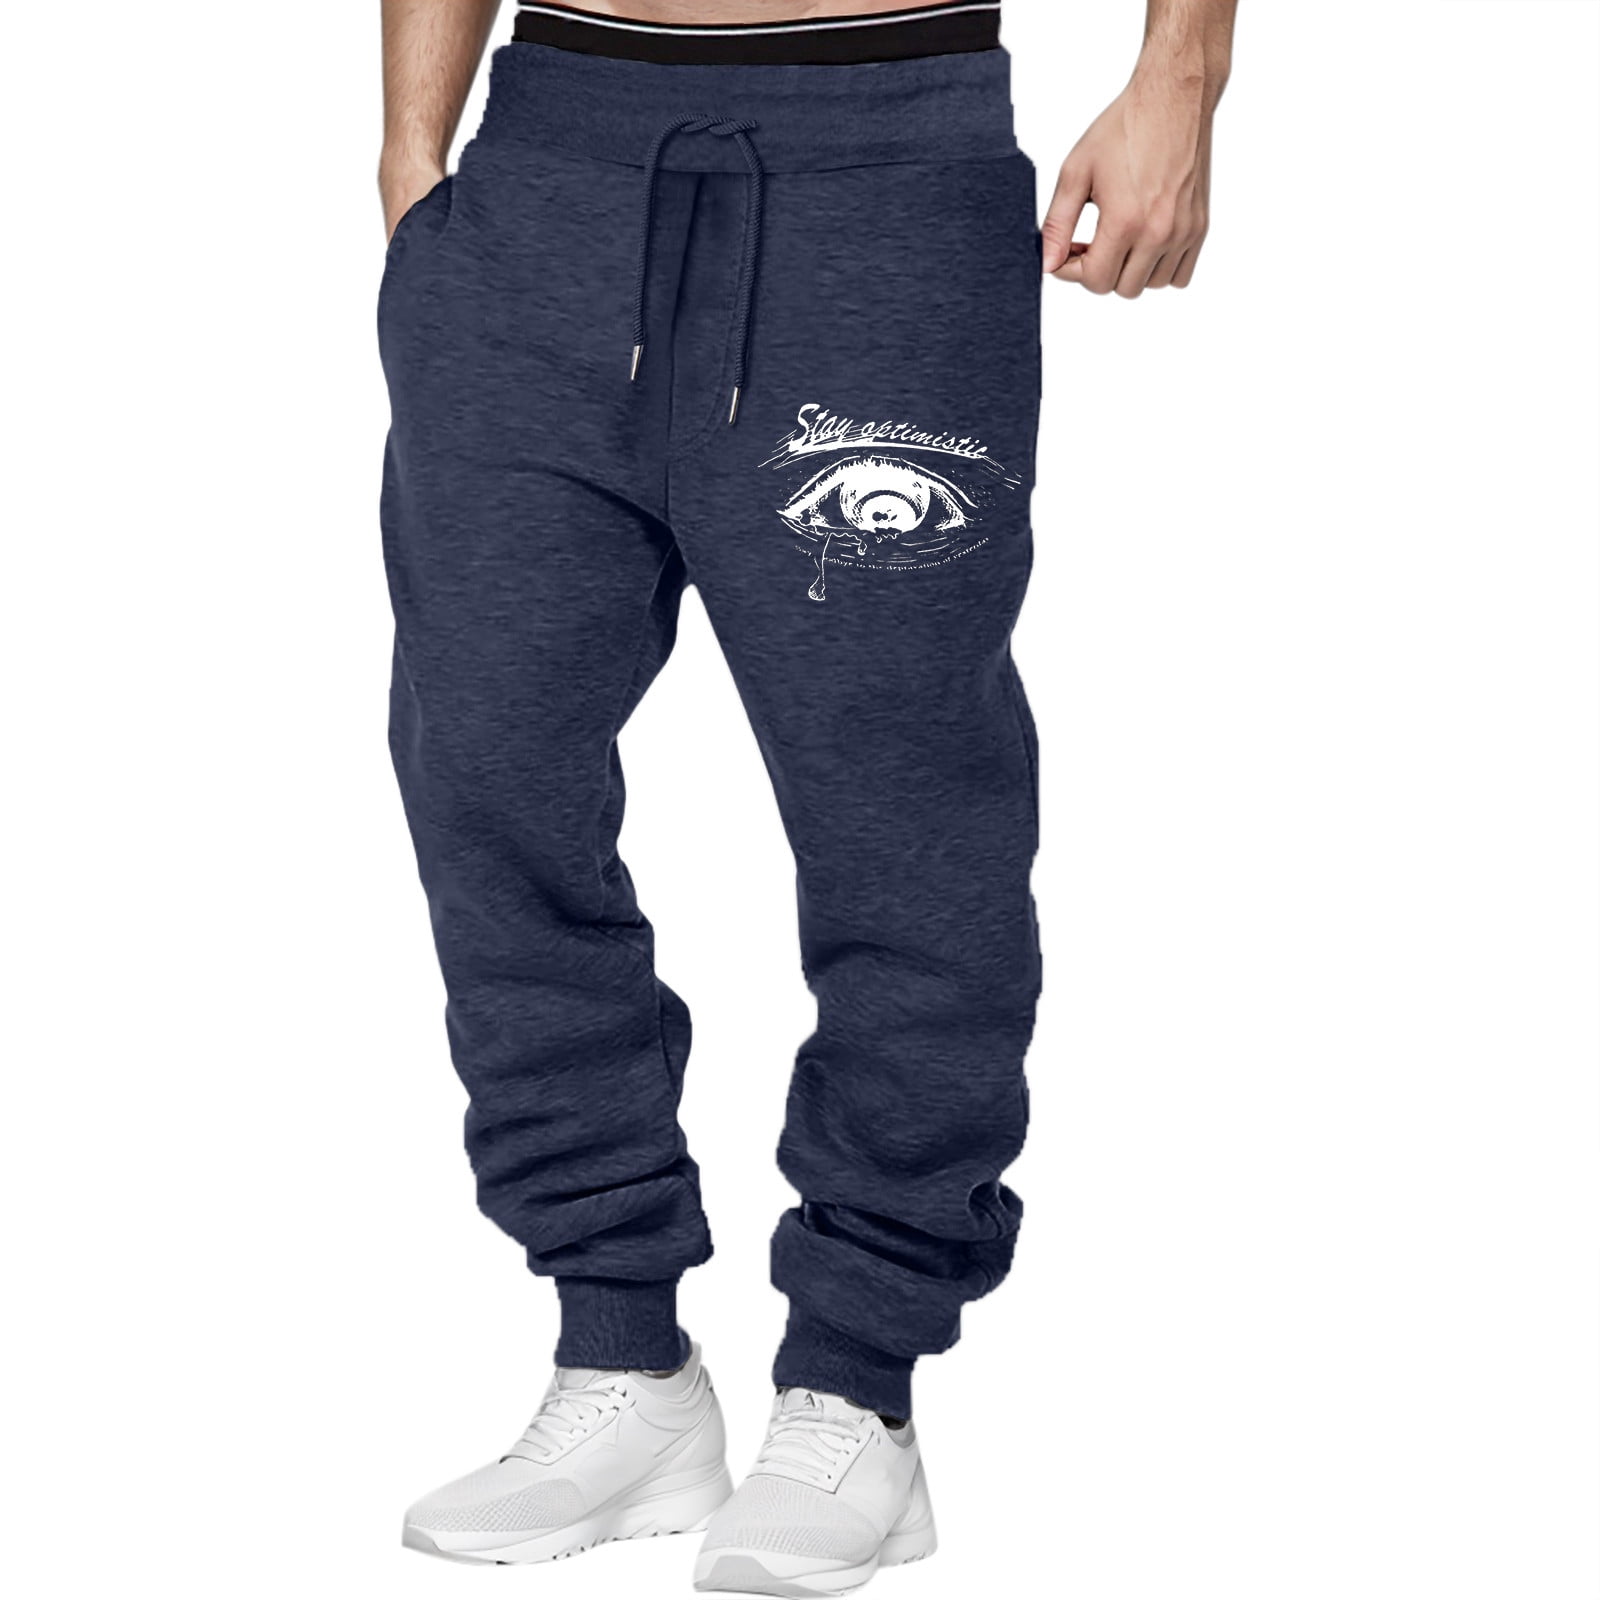 PMUYBHF Mens Sweatpants with Zipper Fly Men's Autumn and Winter High ...